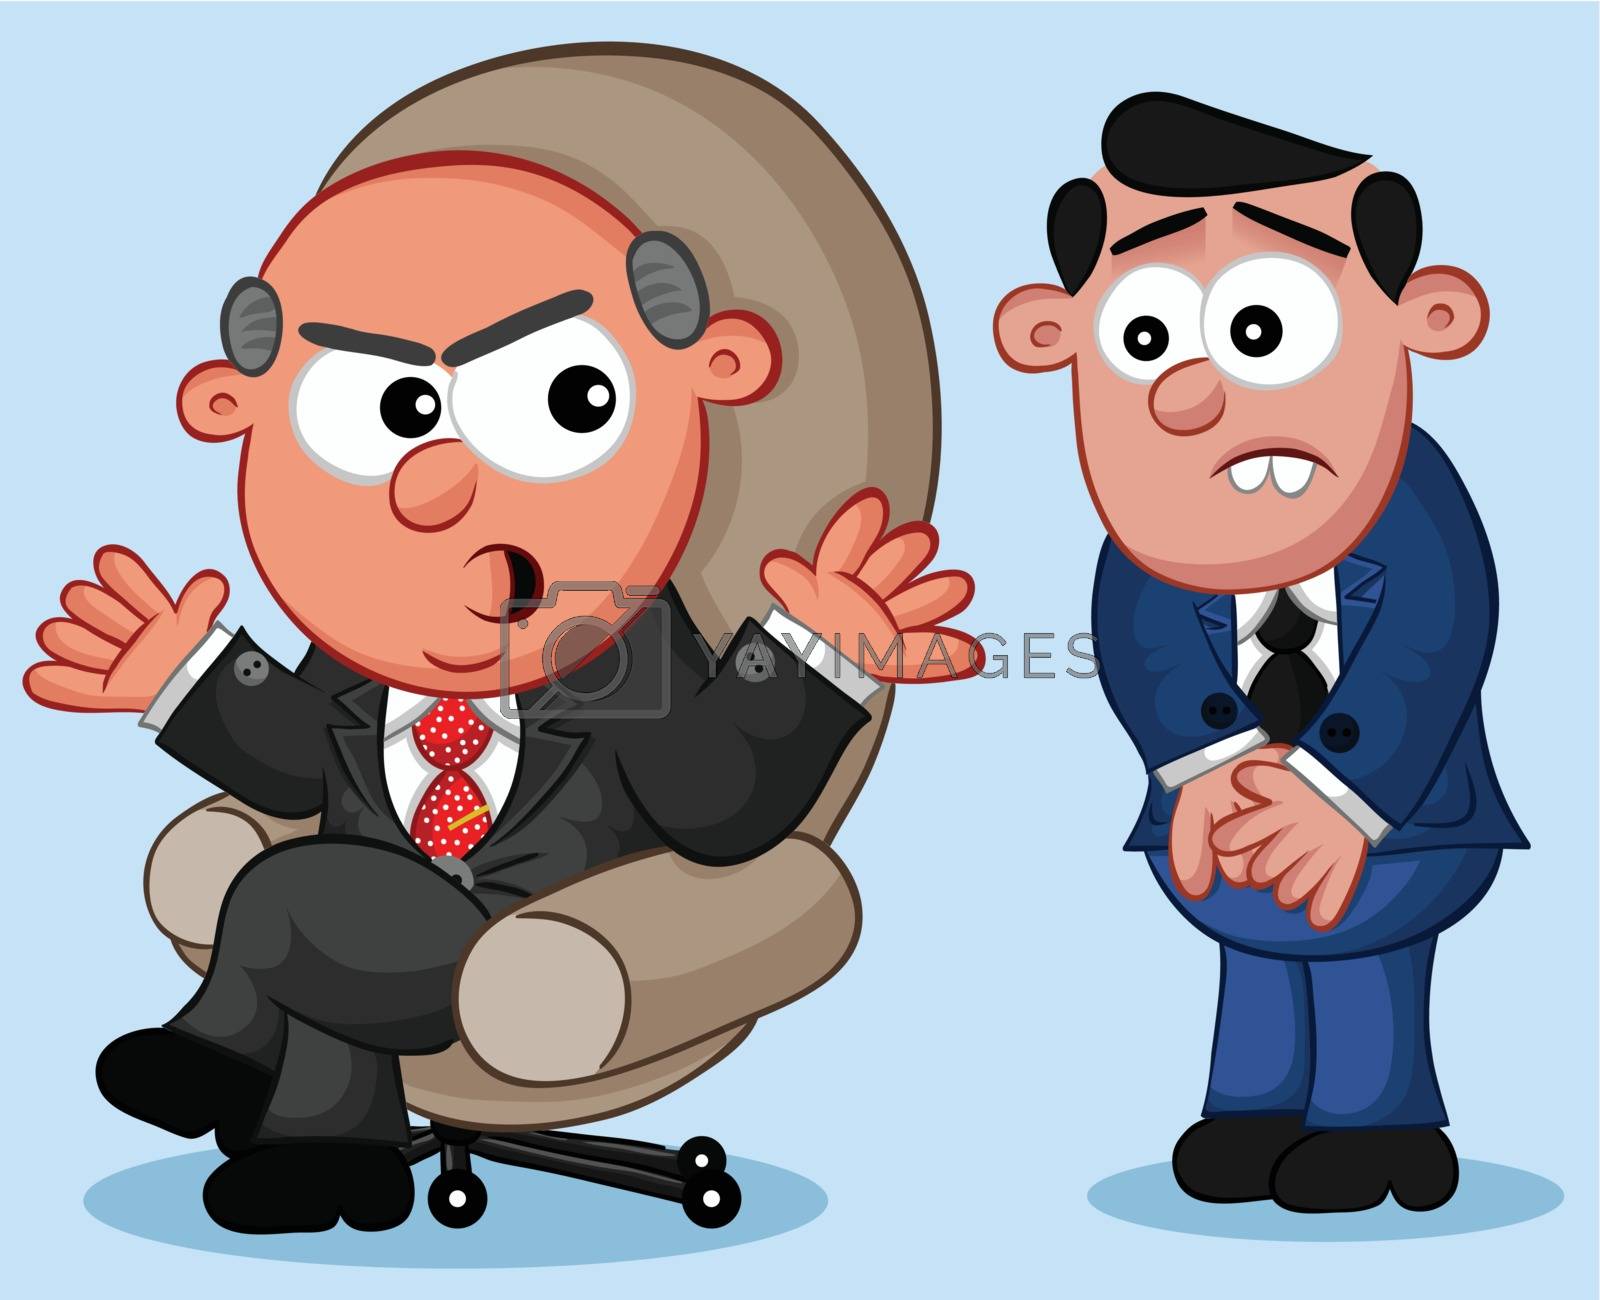 Royalty Free Vector | Business Cartoon - Boss Man Angry at Employee by  emrahavci